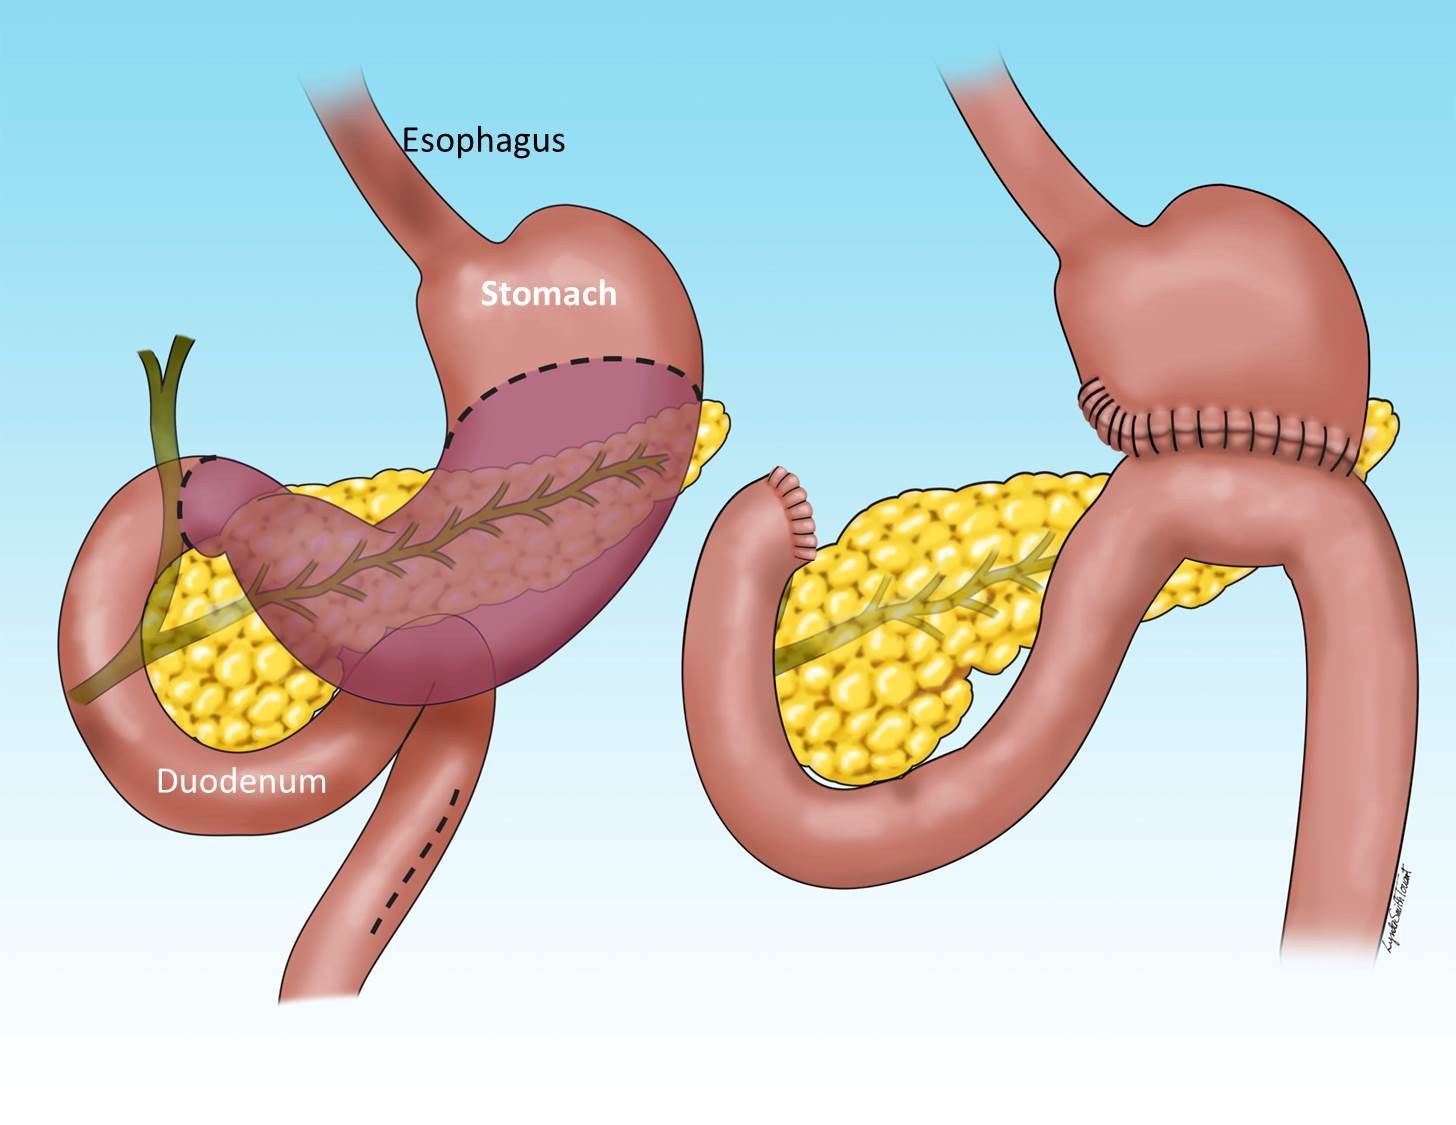 Surgery for Cancer Stomach